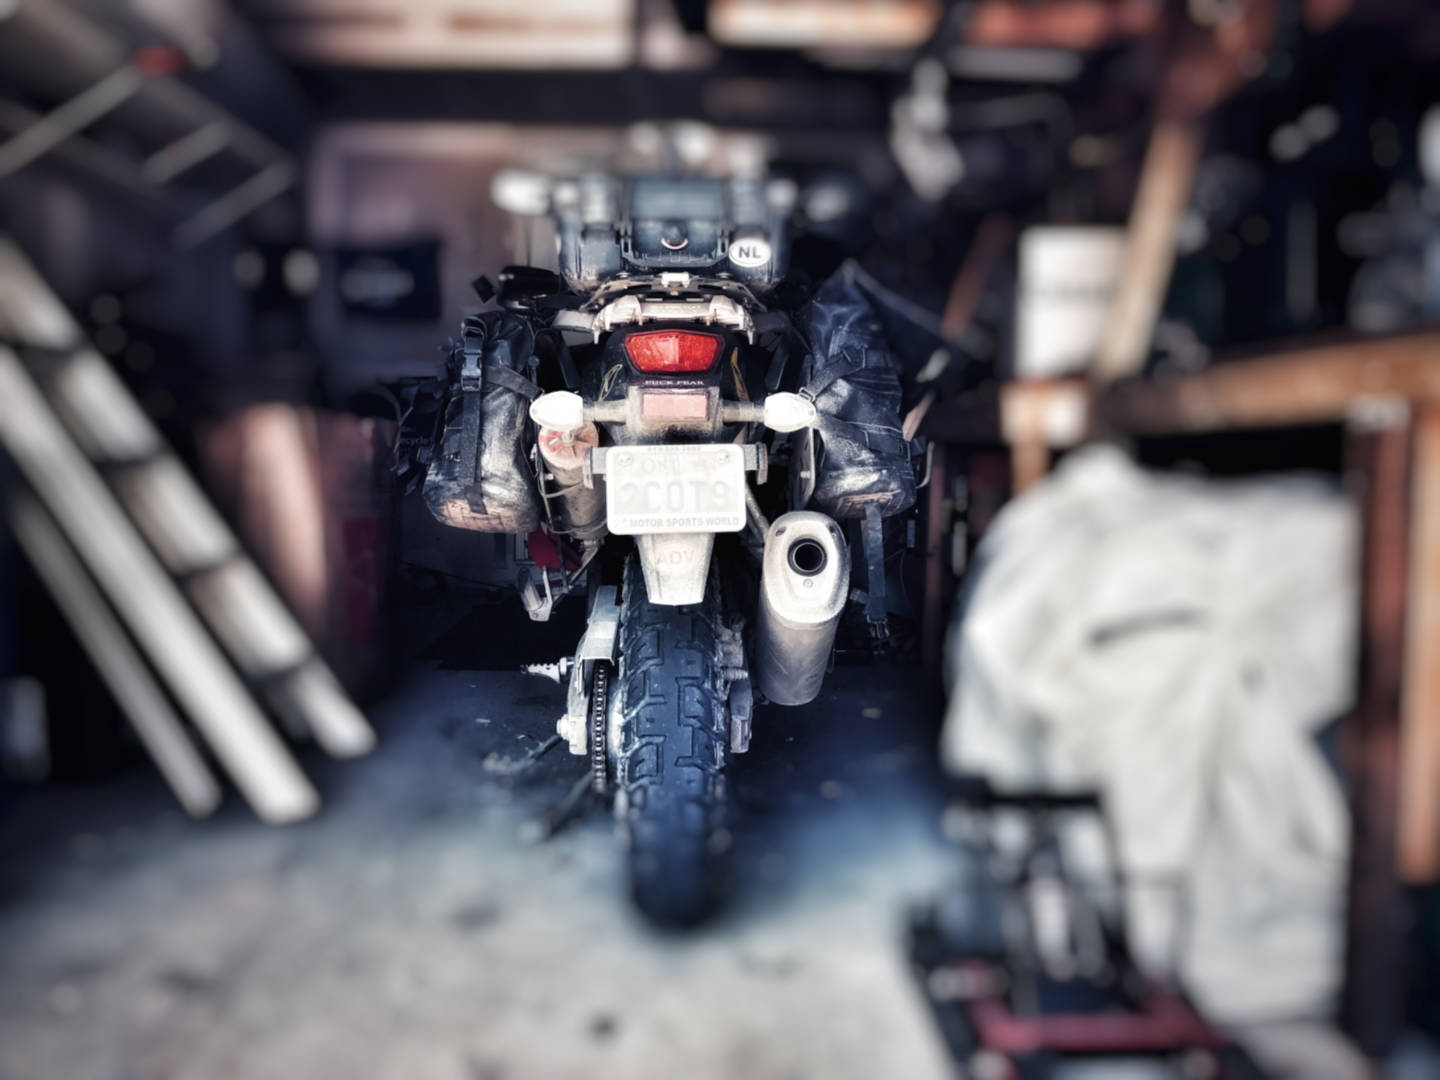 A blurry photo of a motorcycle stored in a garage